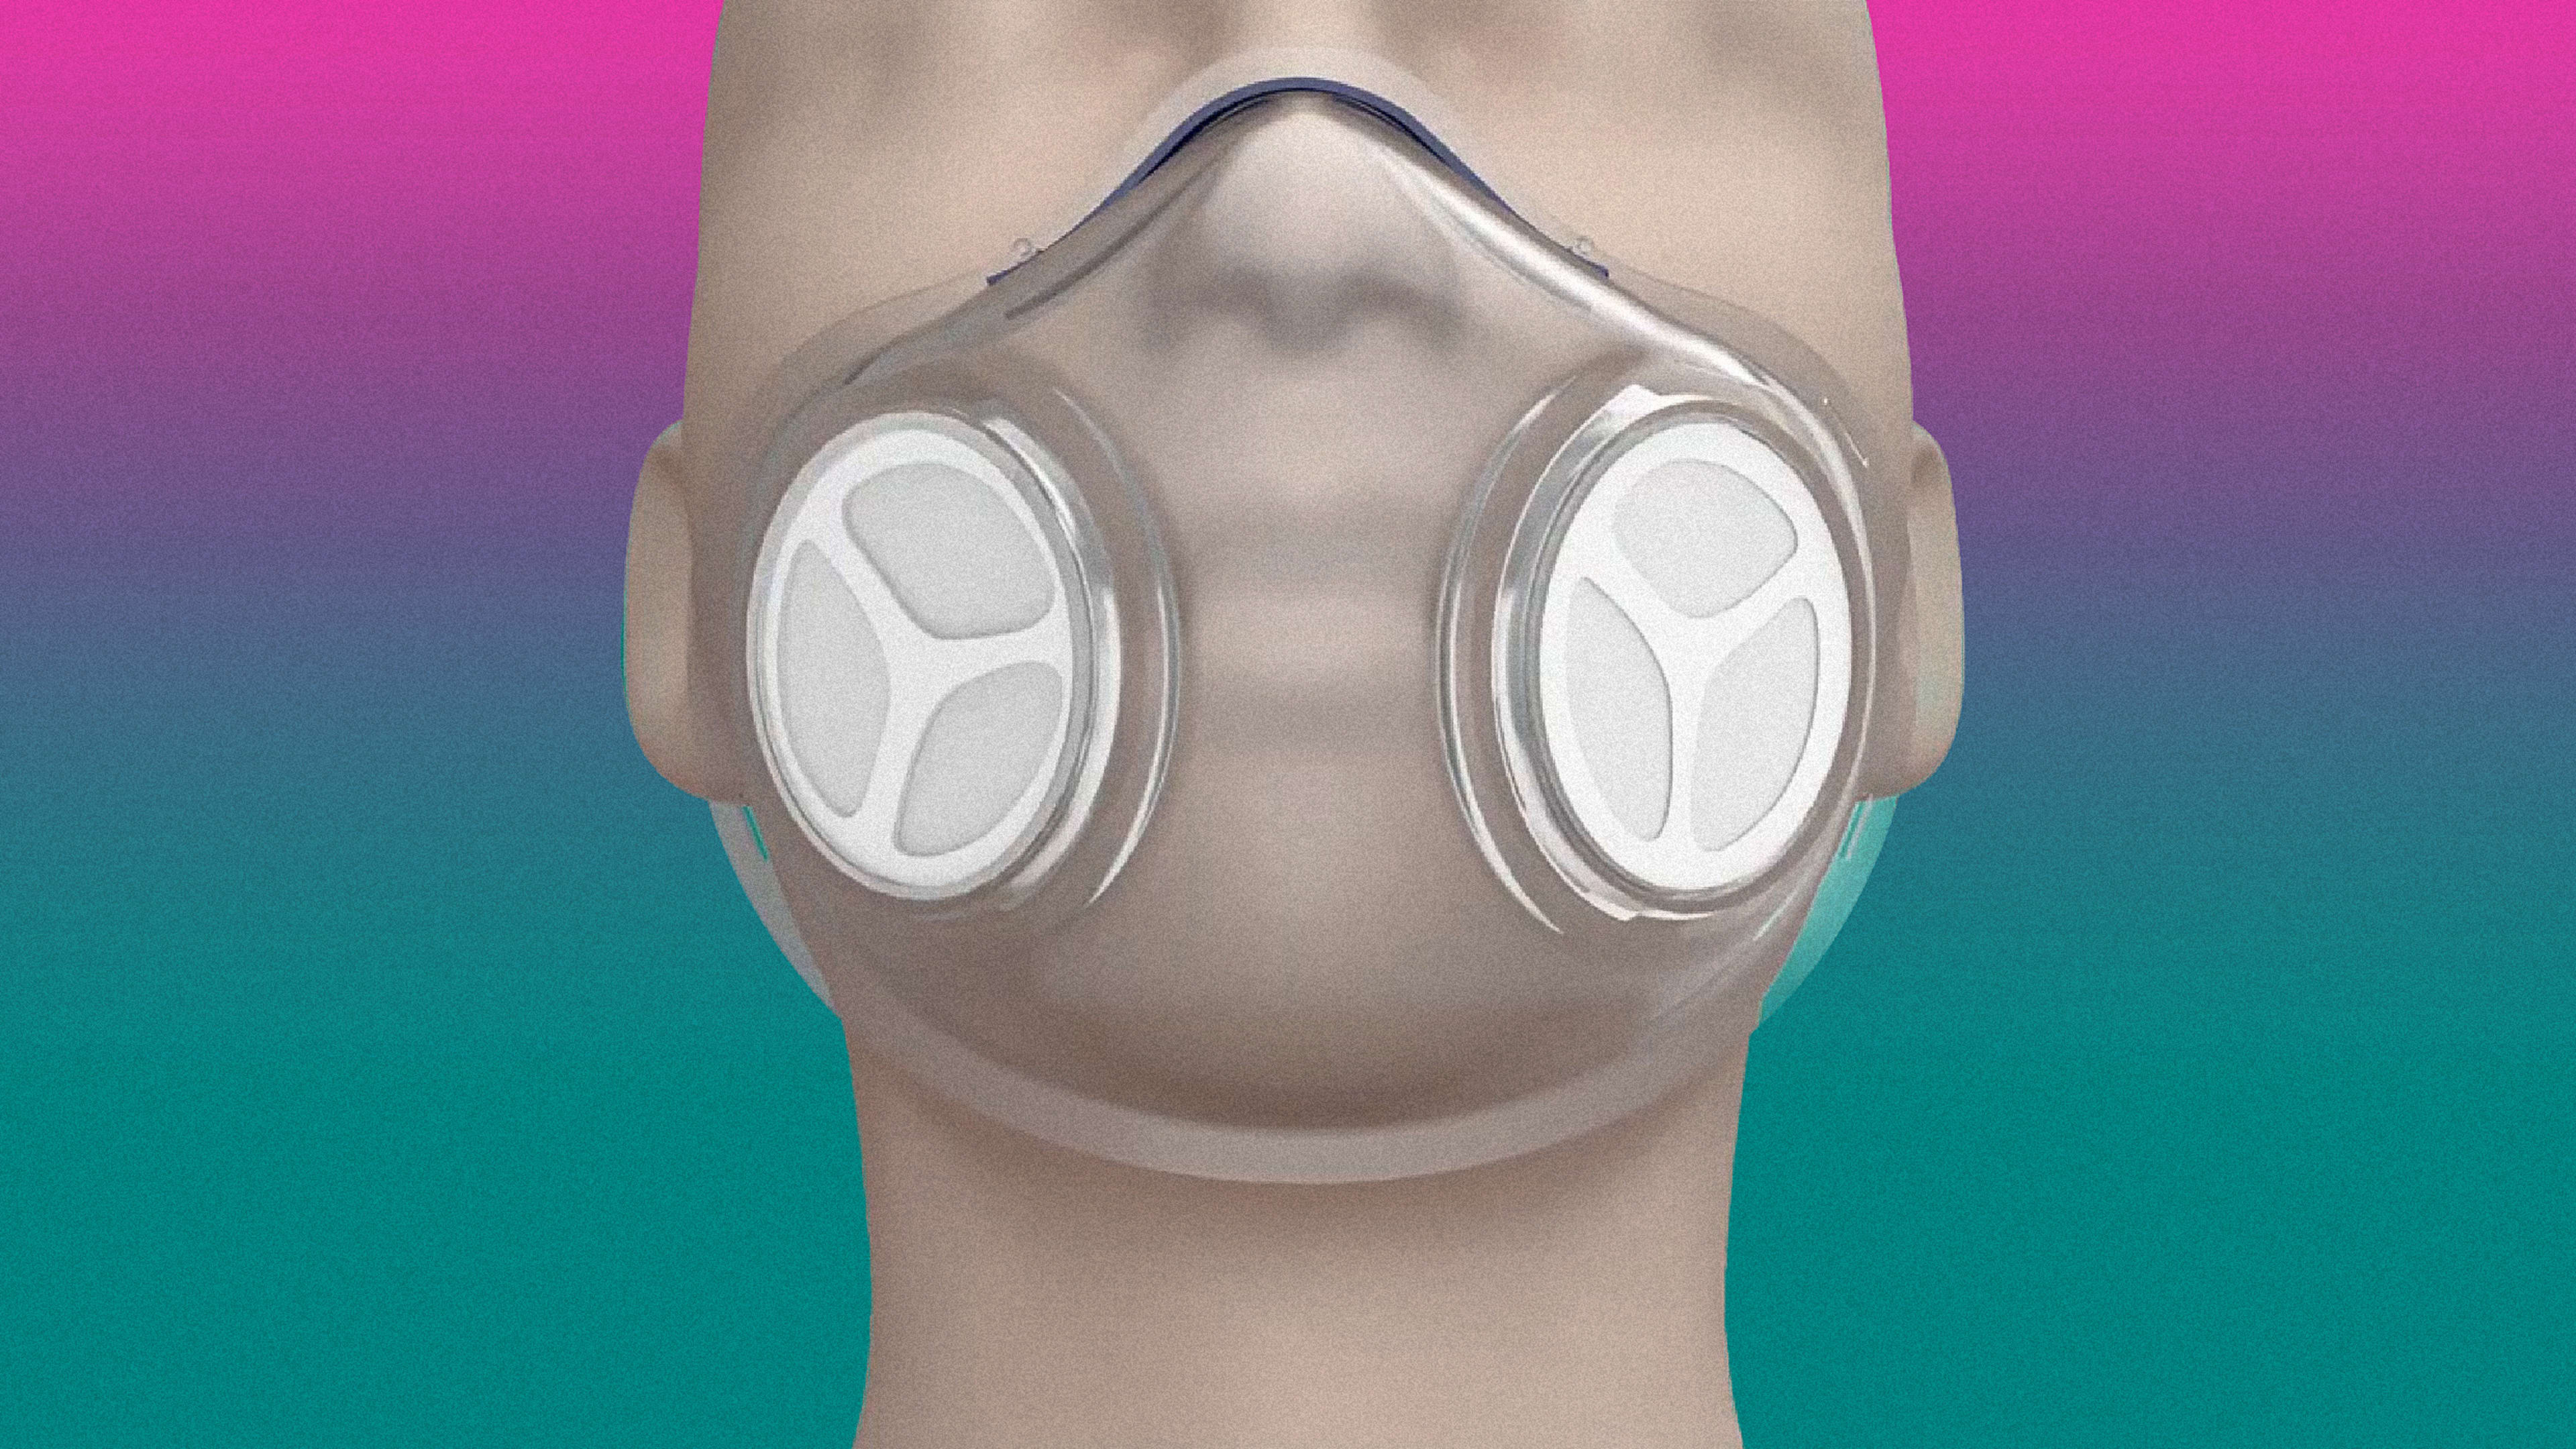 These masks change color when you’re wearing them correctly